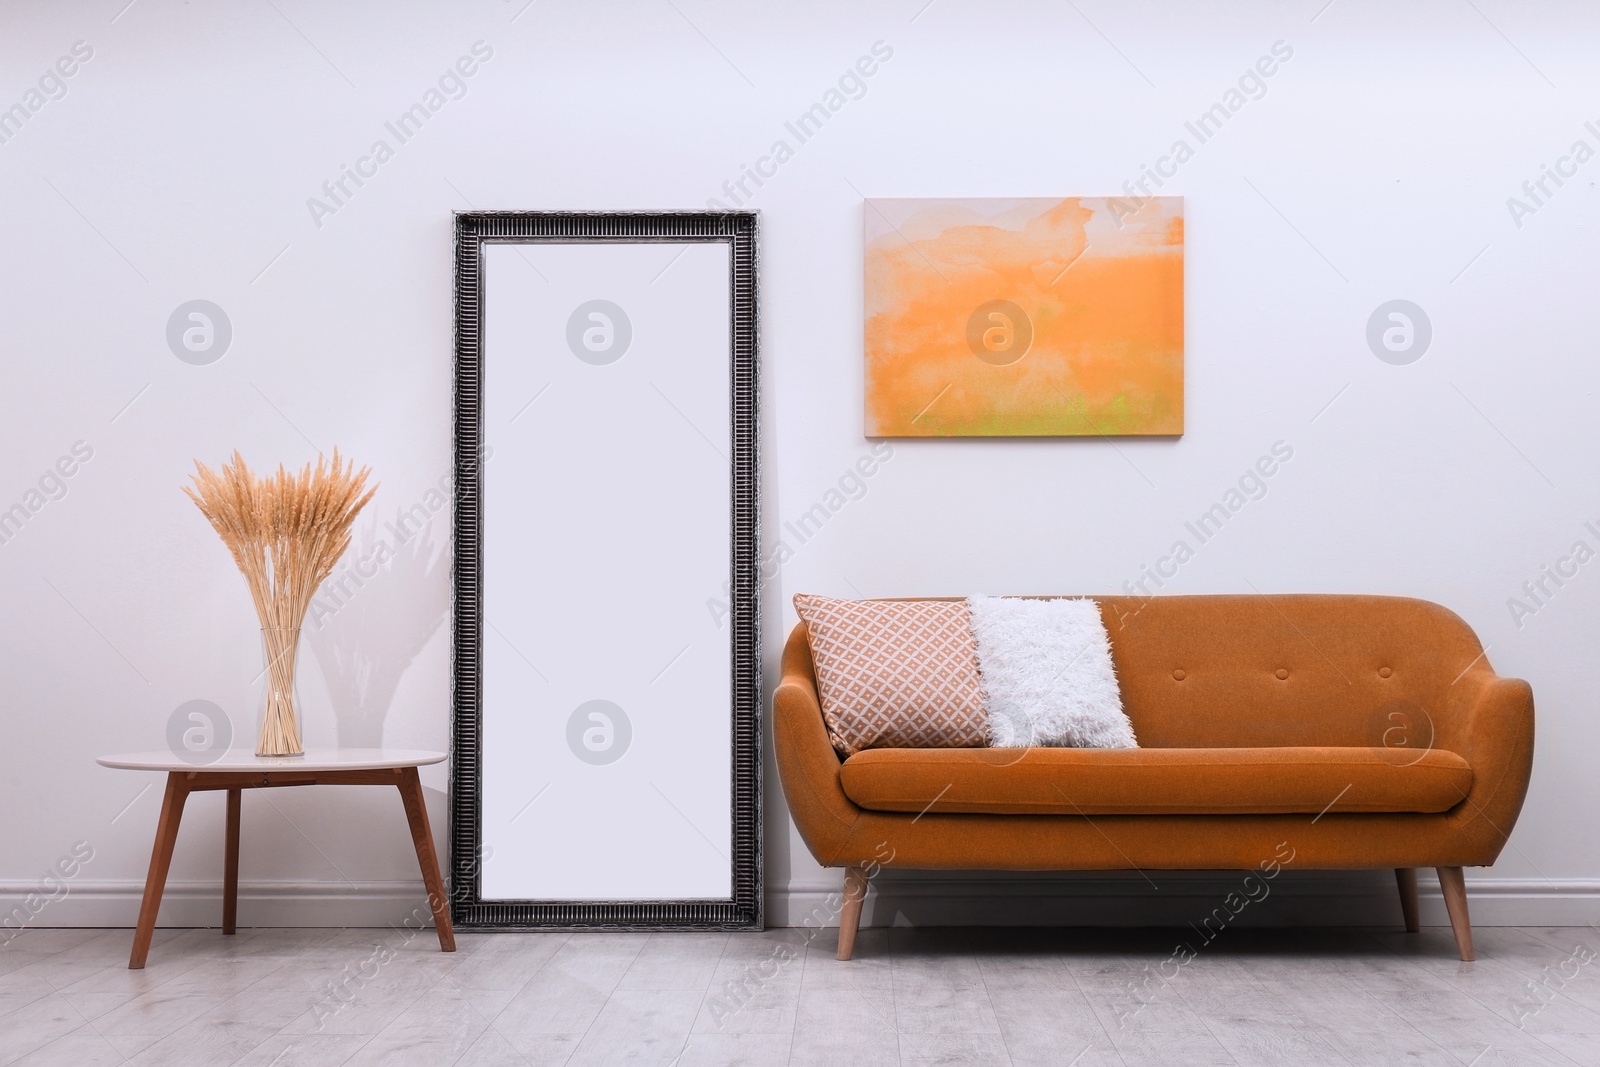 Image of Modern orange painting and stylish furniture in living room interior